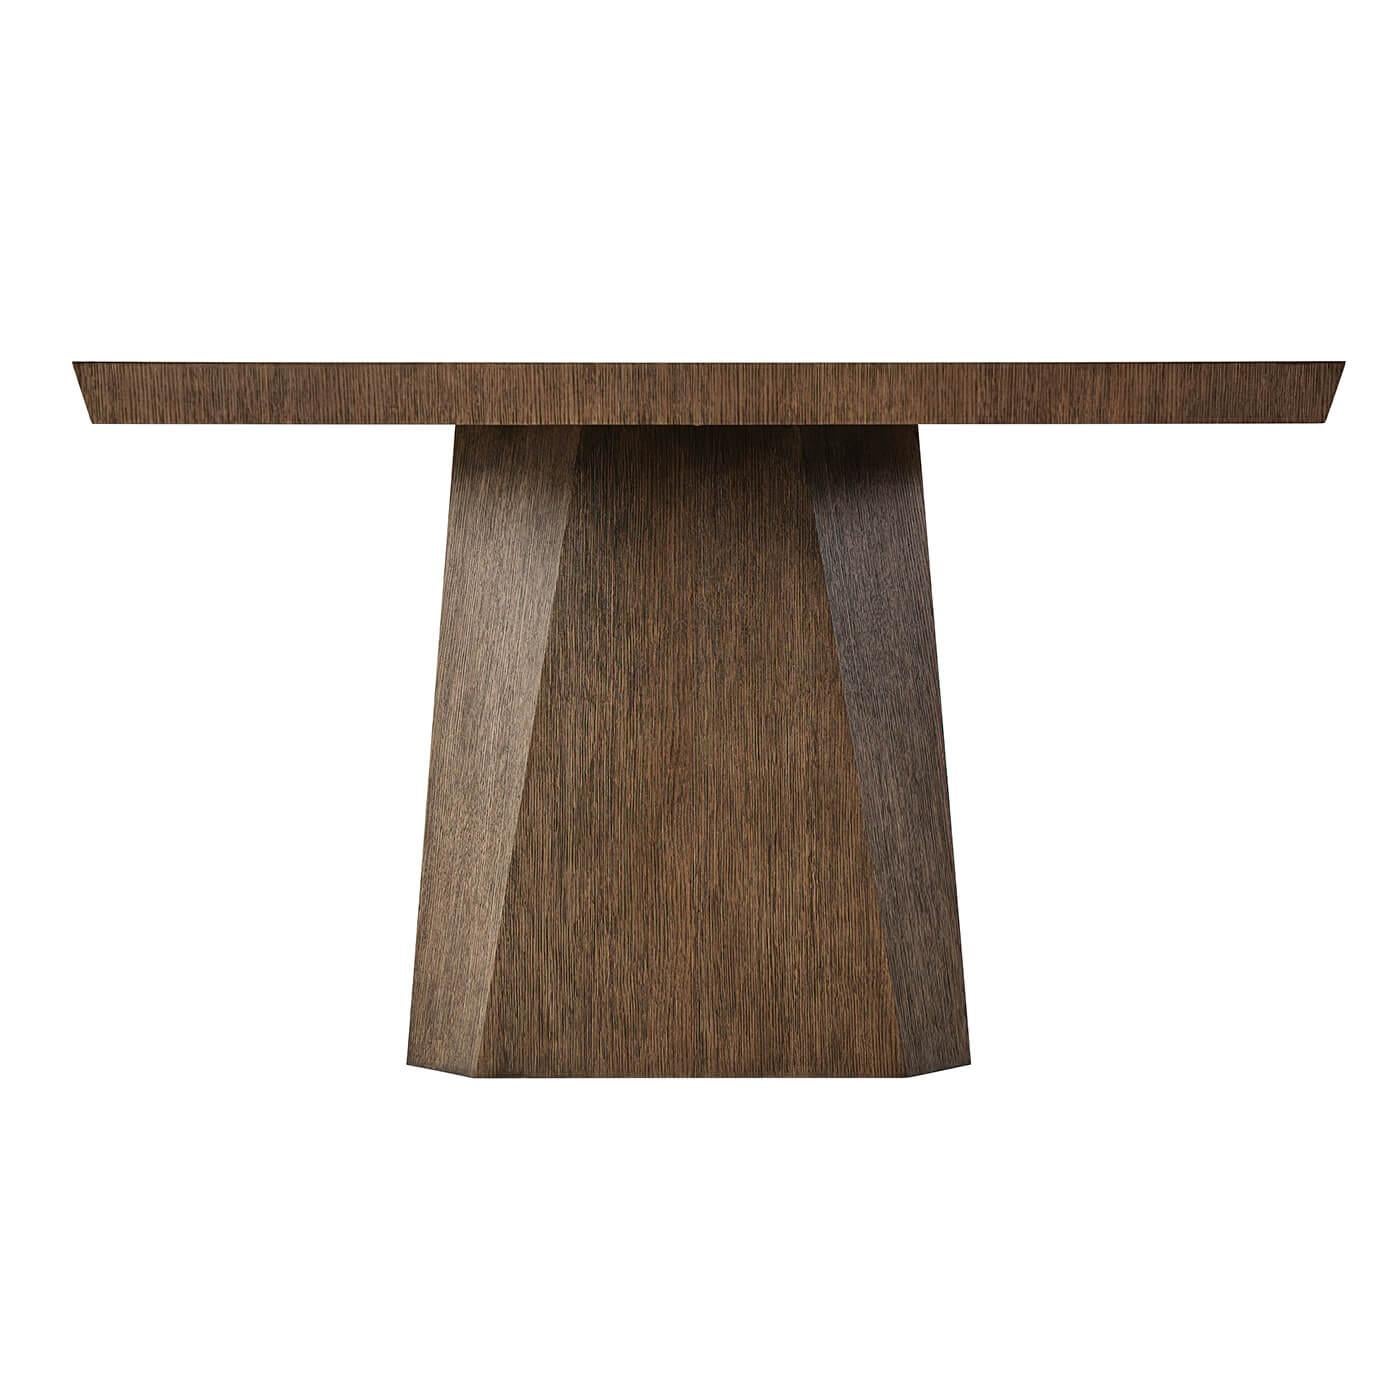 Vietnamese Art Deco Style Dining Table For Sale